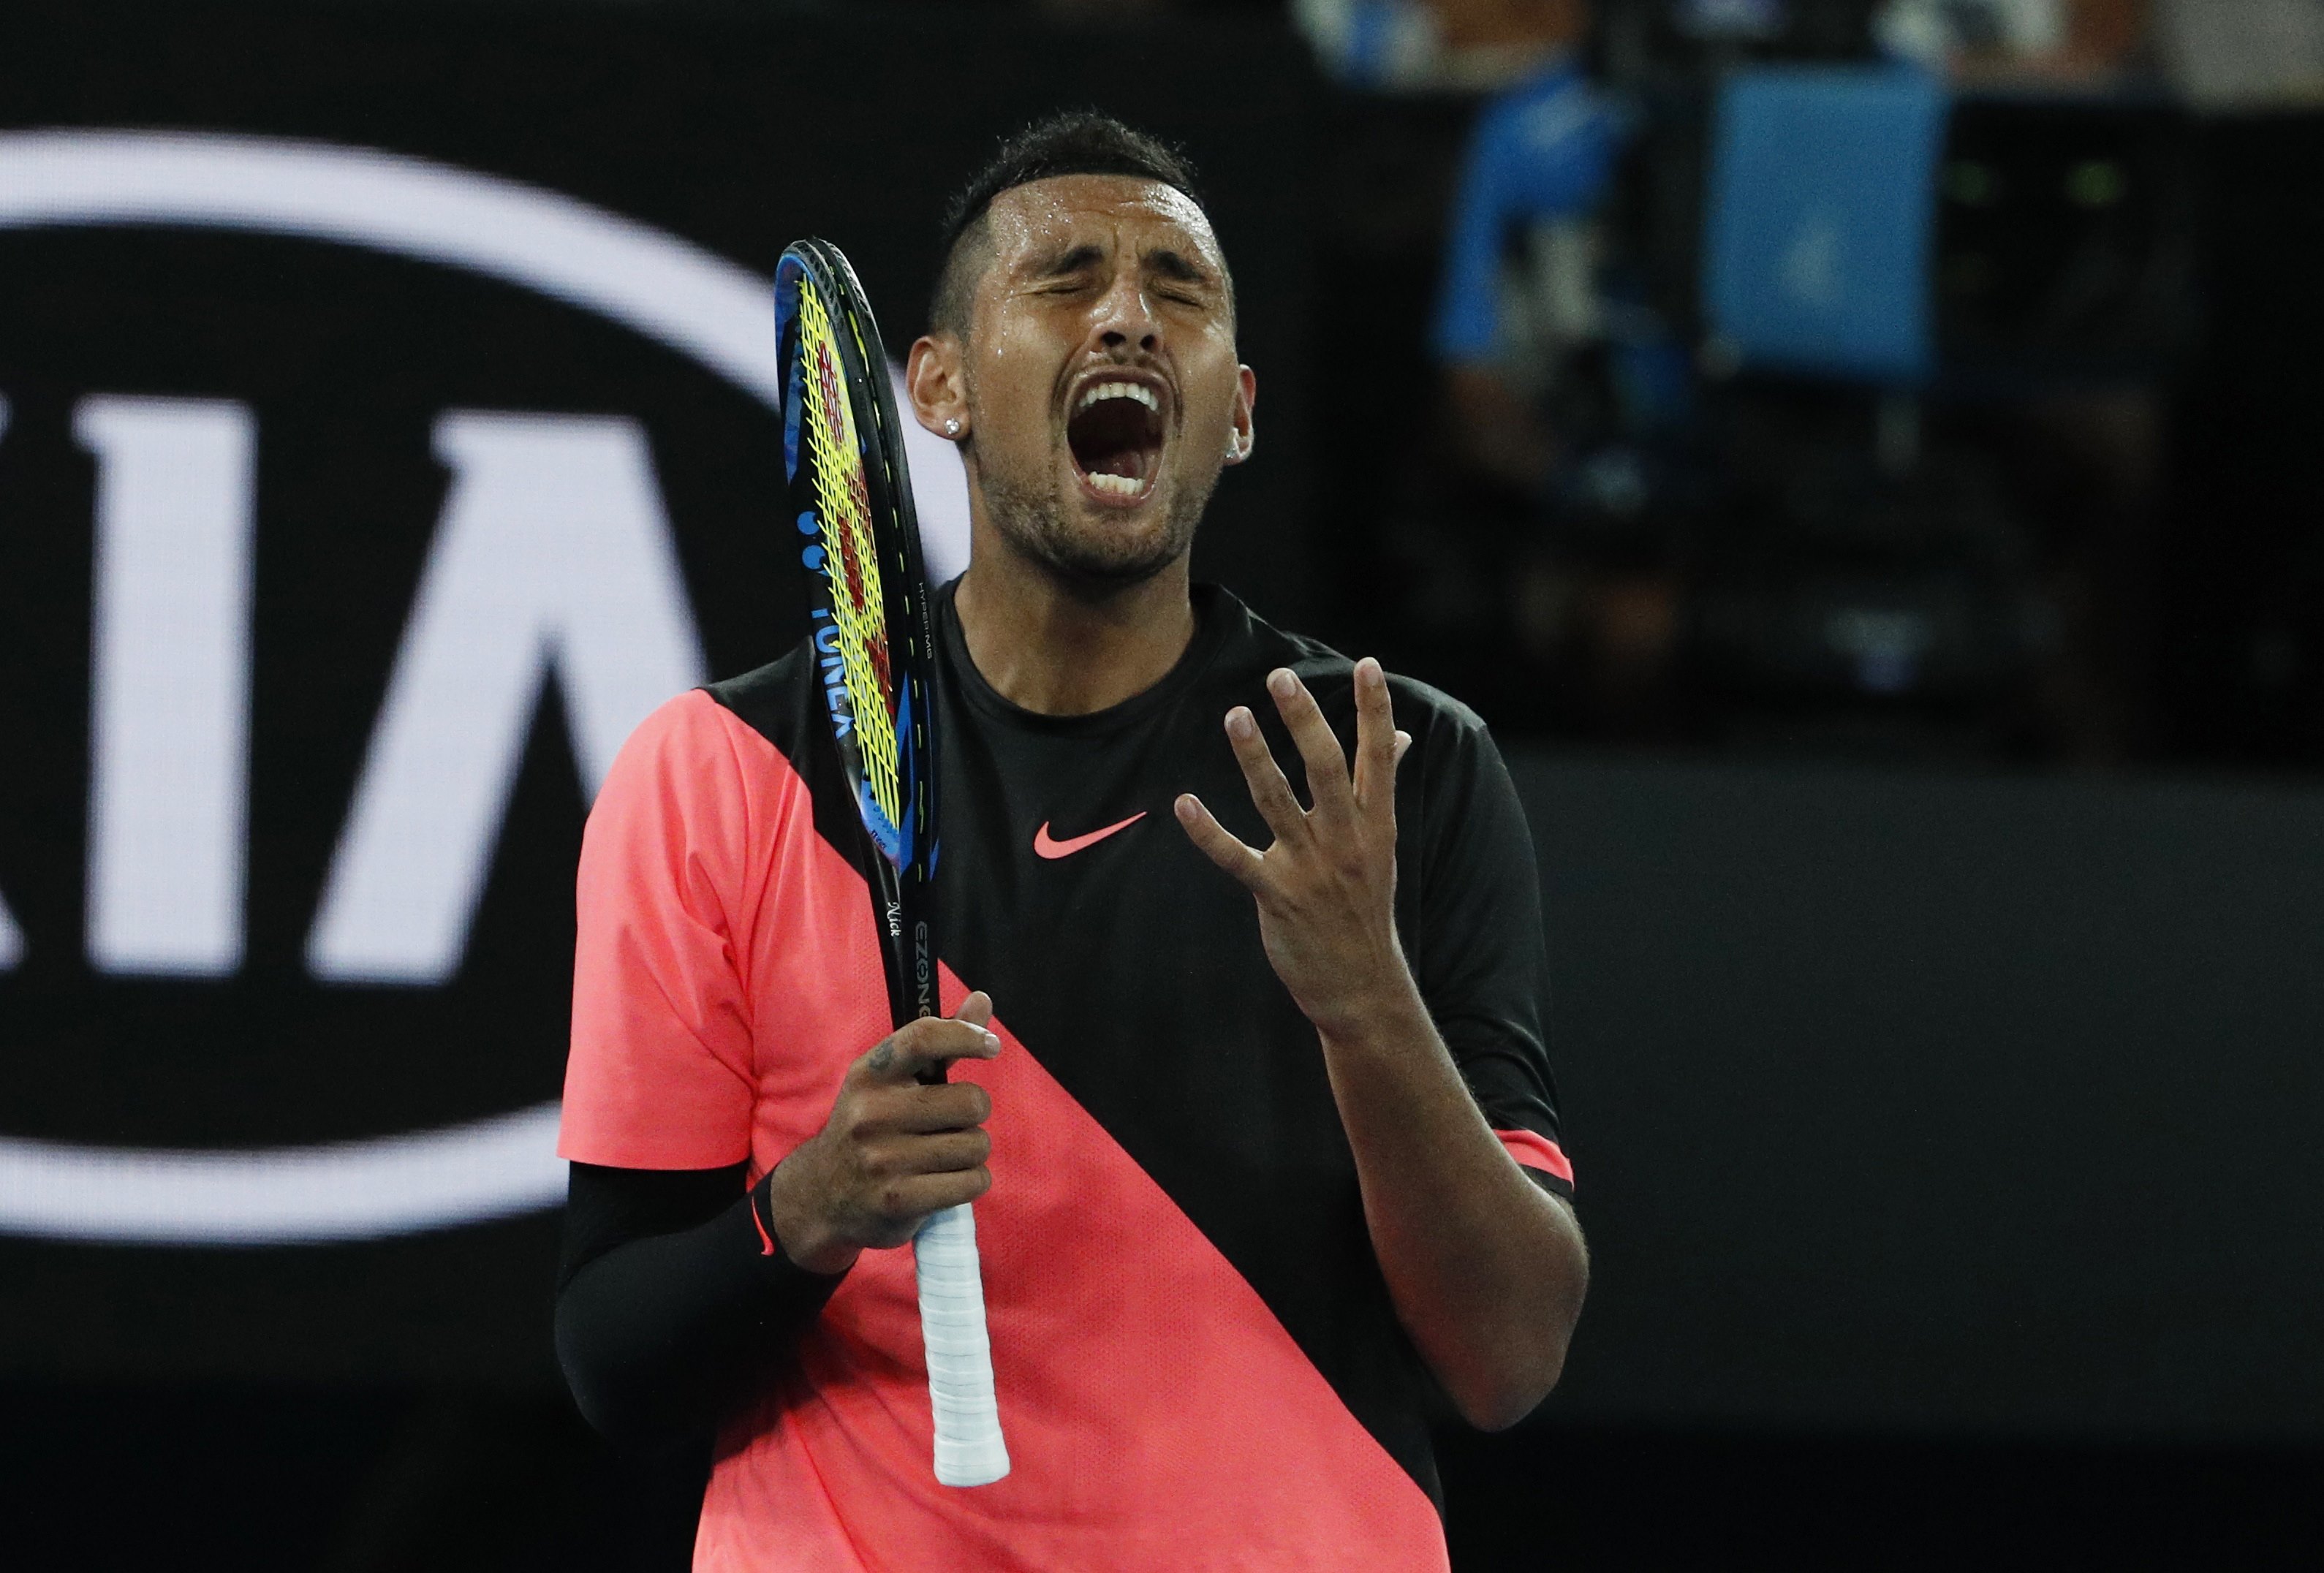 Tennis: Kyrgios bows out defeated but wins over Australia